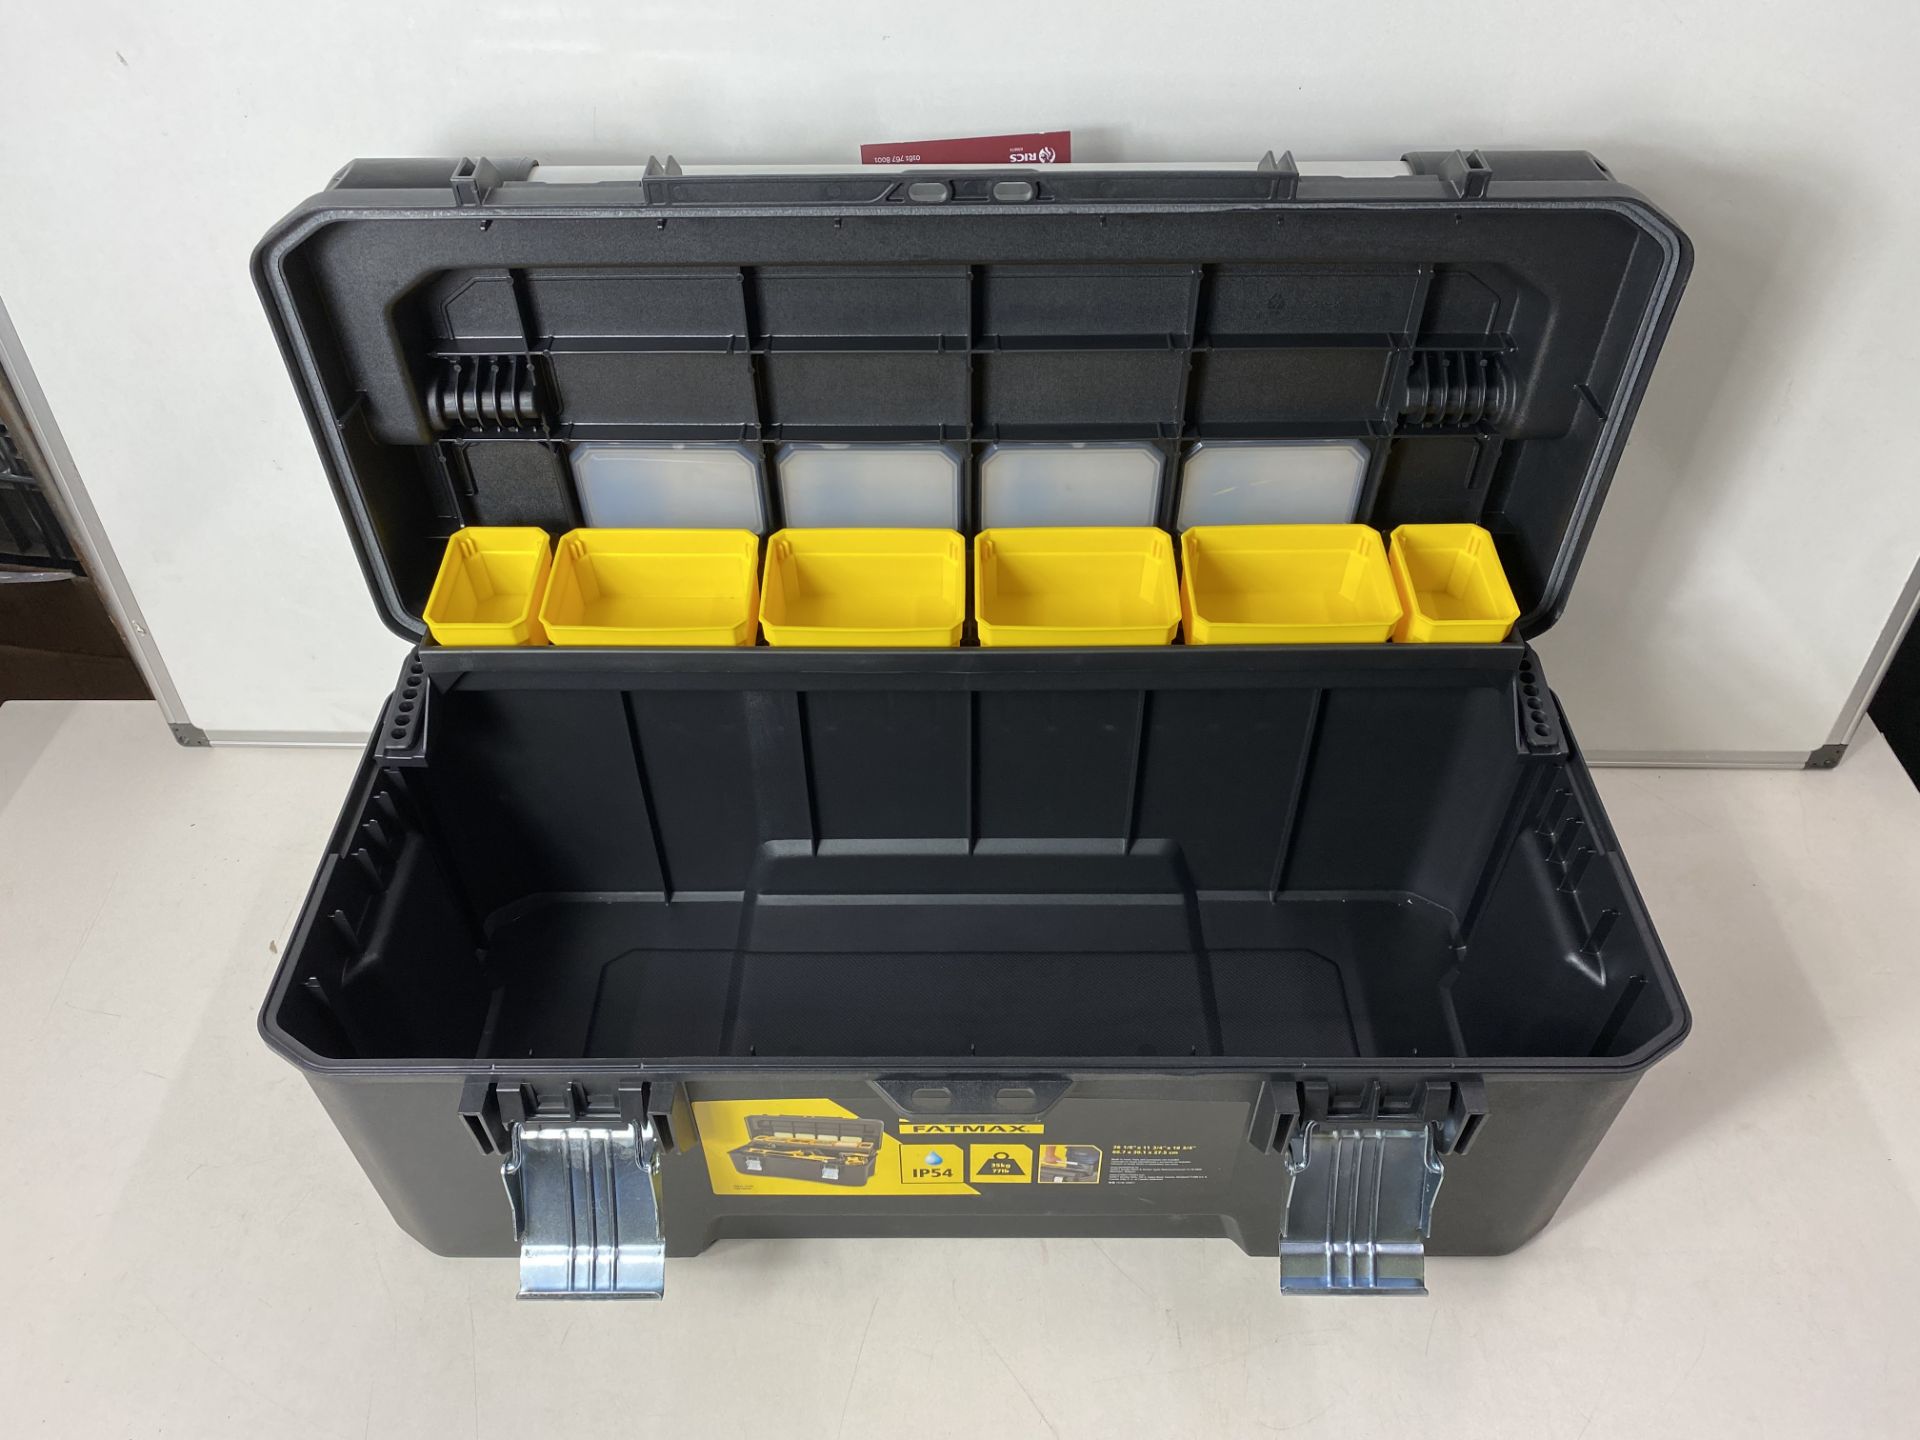 StanleyFMST1-75791 26" FATMAX CANTILEVER PRO TOOLBOX - Image 3 of 3